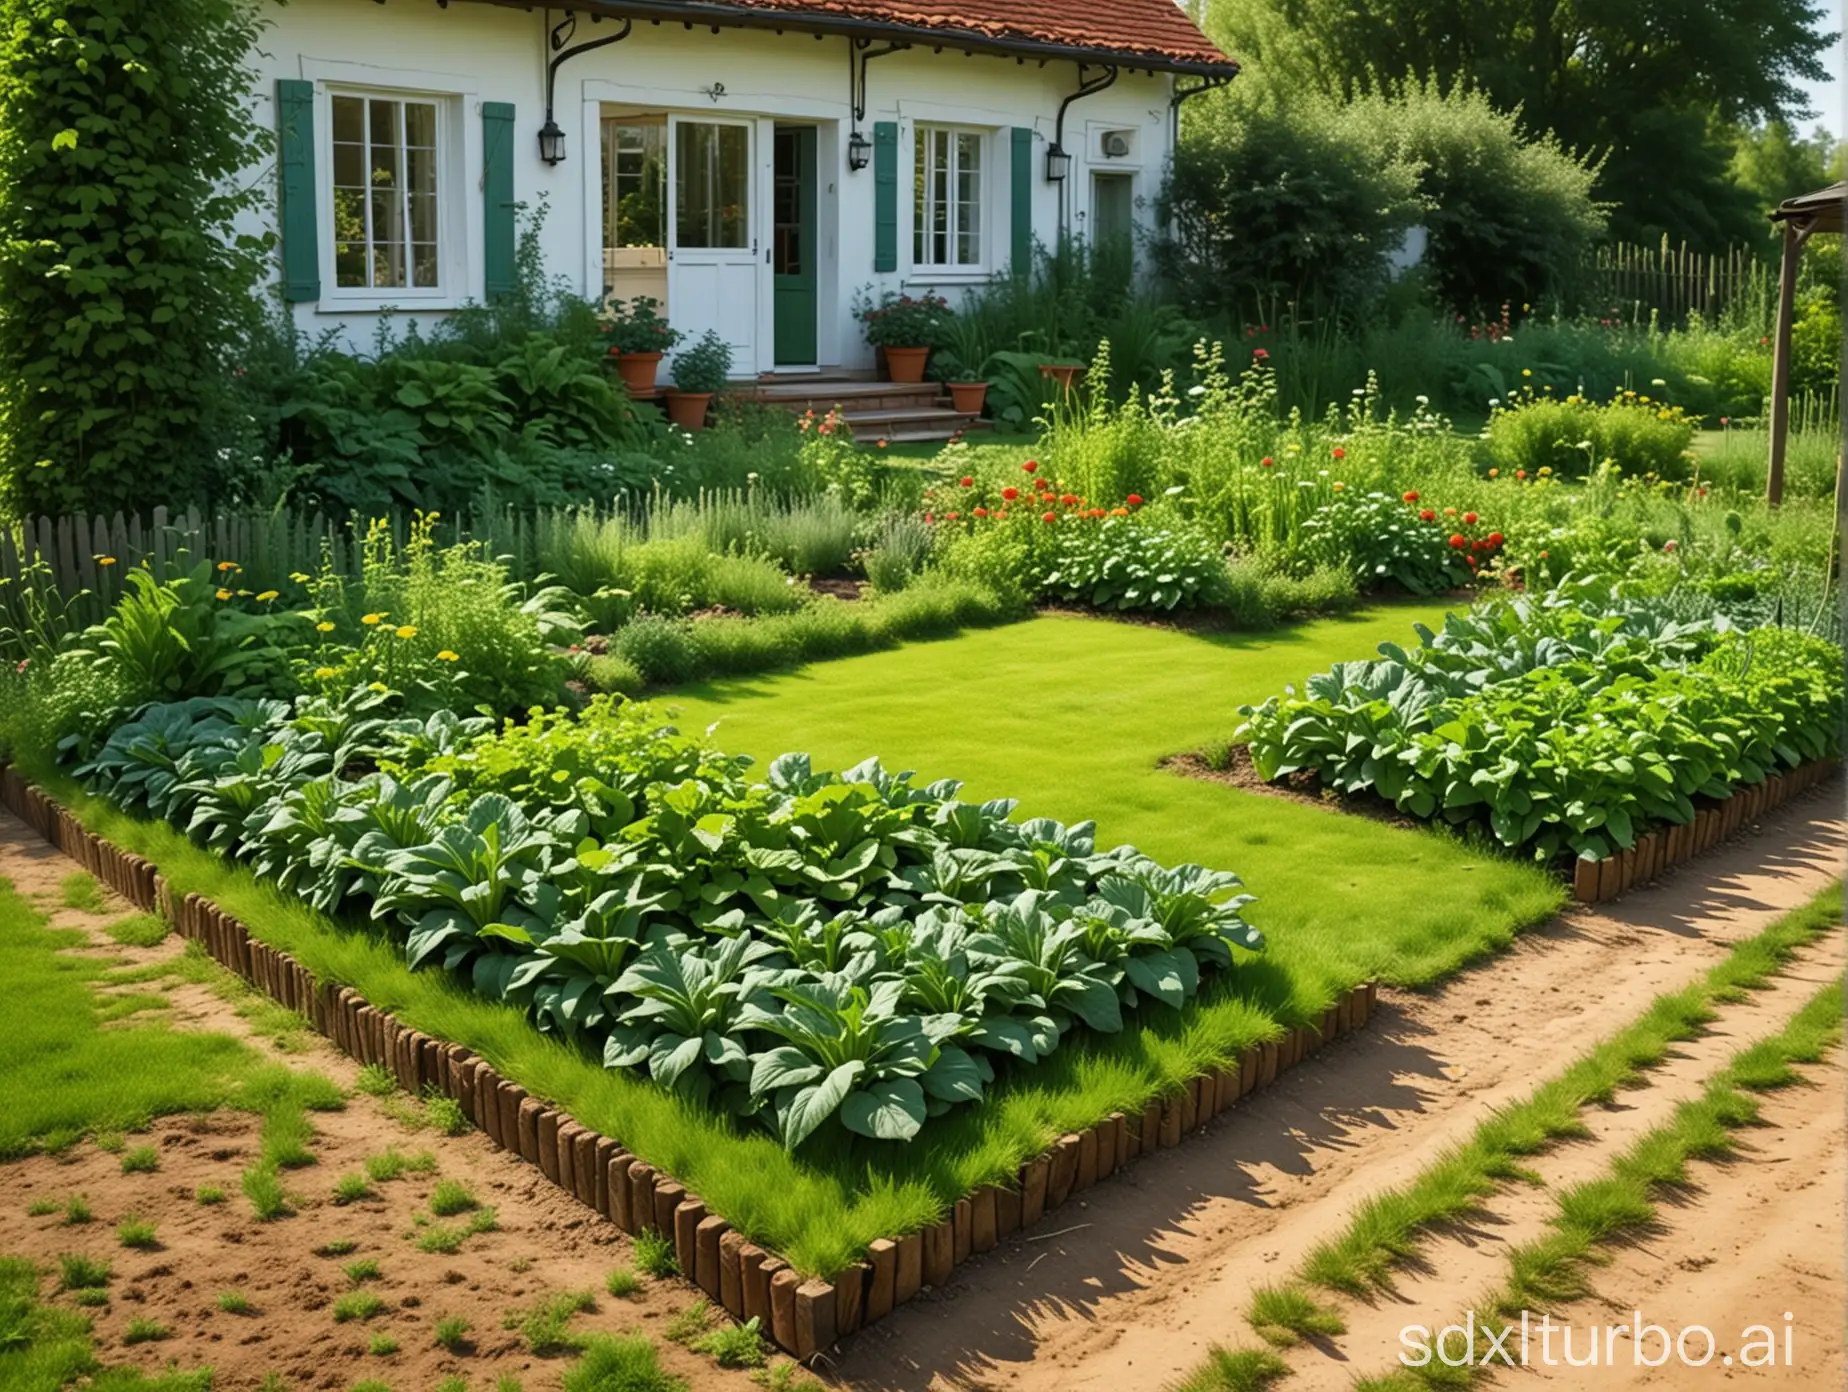 A GREEN LAWN, A SUNNY DAY, REALISM, A COUNTRY HOUSE, VEGETABLES GROW IN THE BEDS